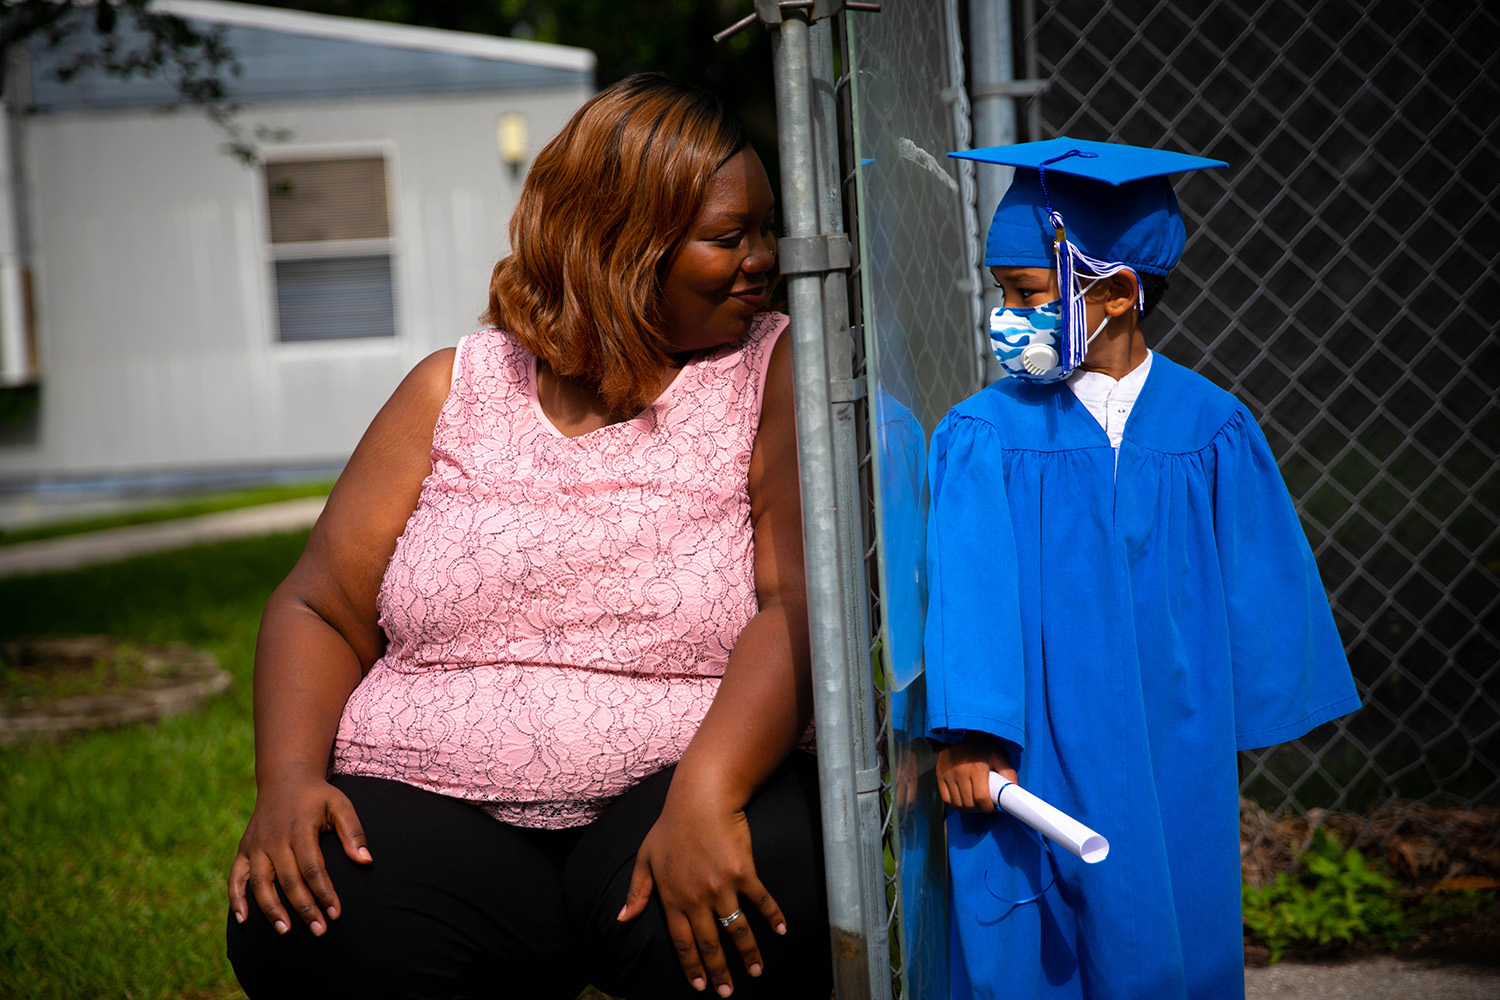 Santa Fe College Little School students were able to pose for a photo with their teachers while wearing a graduation cap and gown on May 27, 2020 in Gainesville, Fla. A plexiglass barrier was put between the teacher and student. (Matt Stamey/Santa Fe College ) ***Subjects Have Releases***